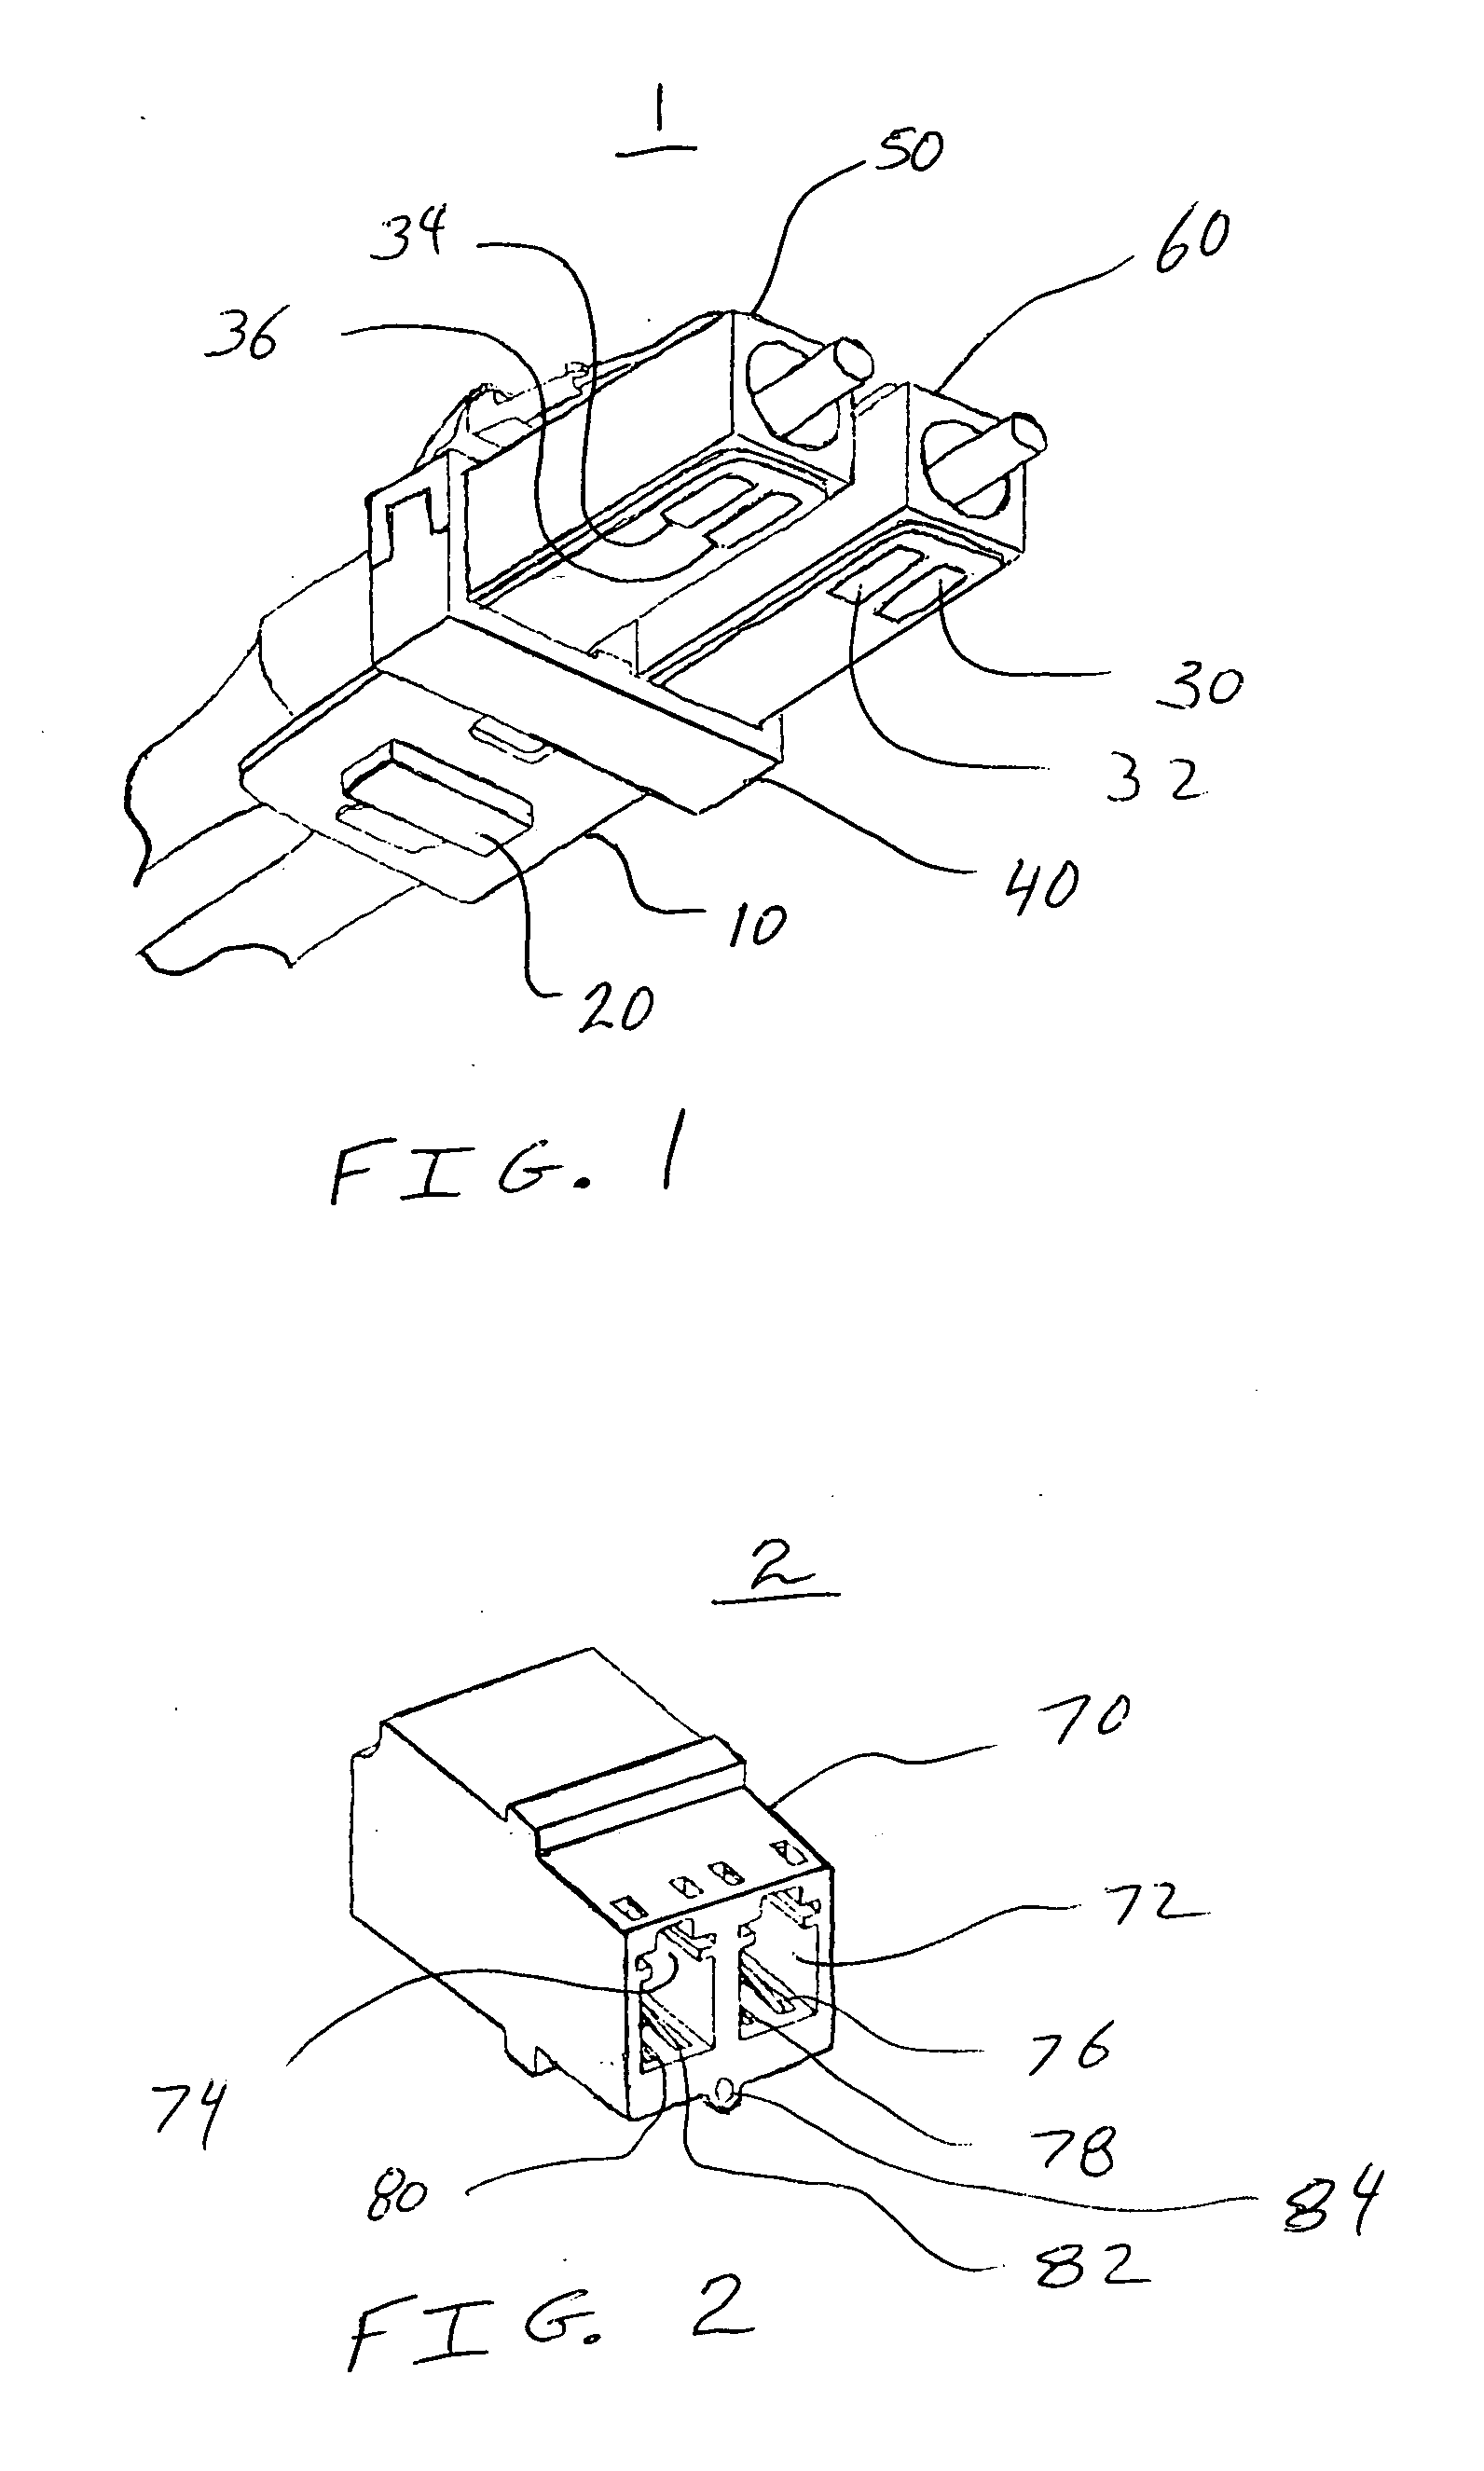 Transceiver/fiber optic connector adaptor with patch cord id reading capability